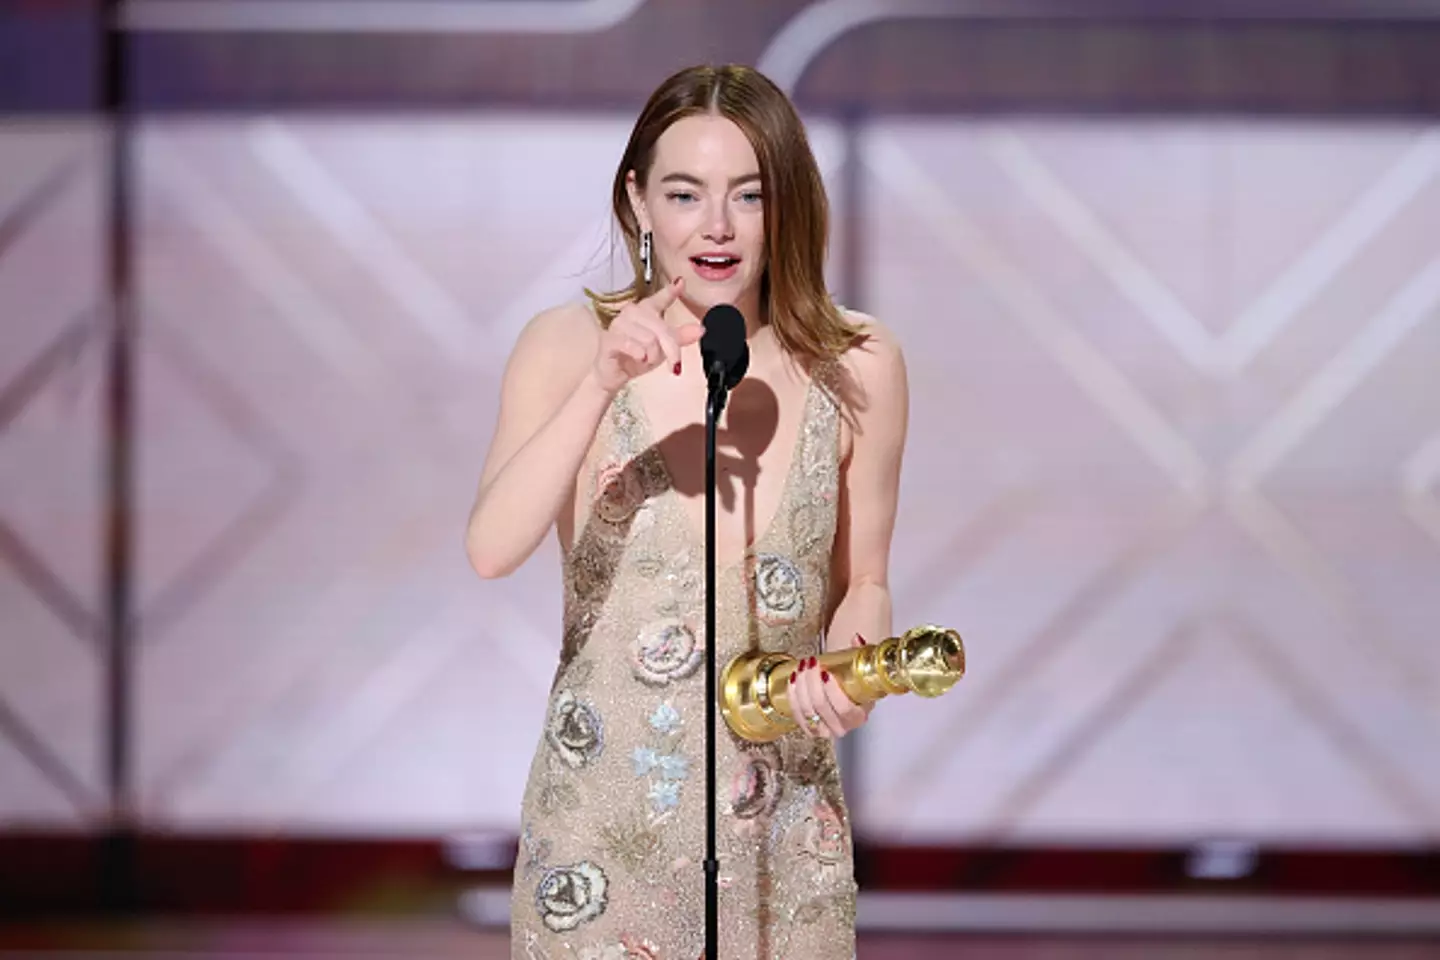 Emma Stone won a Golden Globe for her performance in Poor Things.